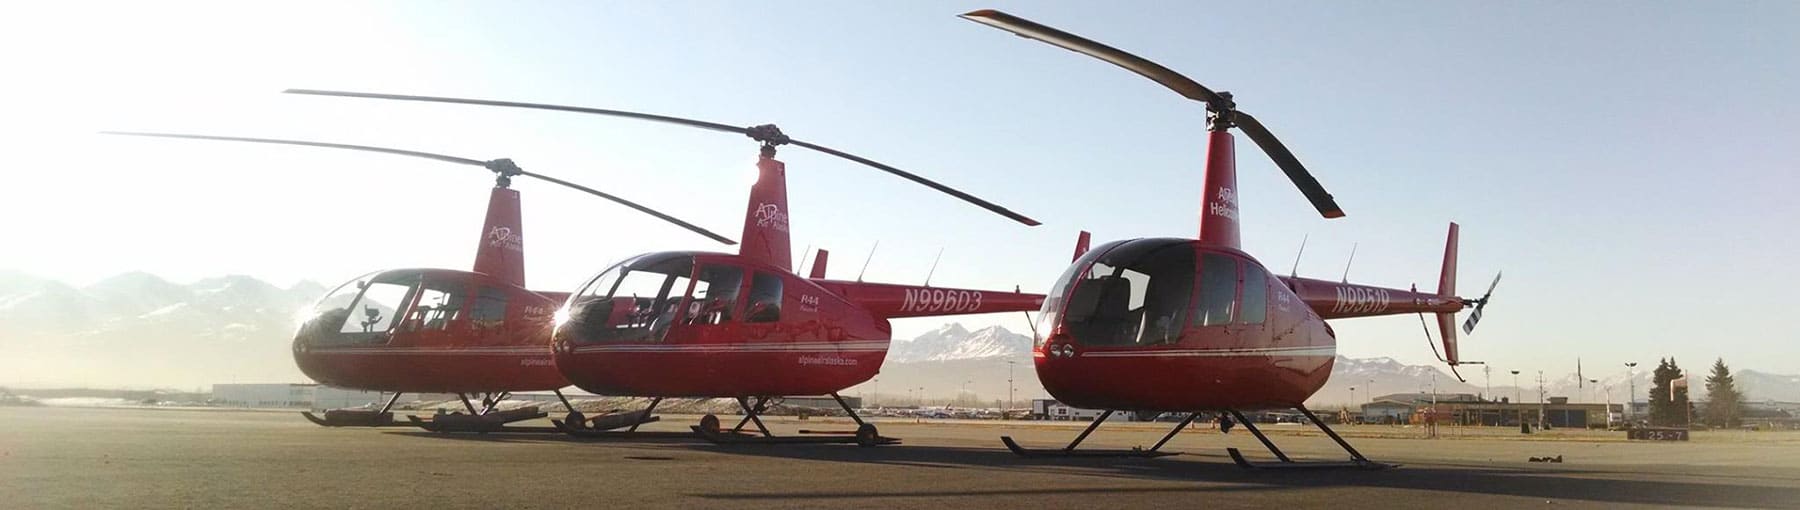 Three Robinson helicopters on the ground at the airport.